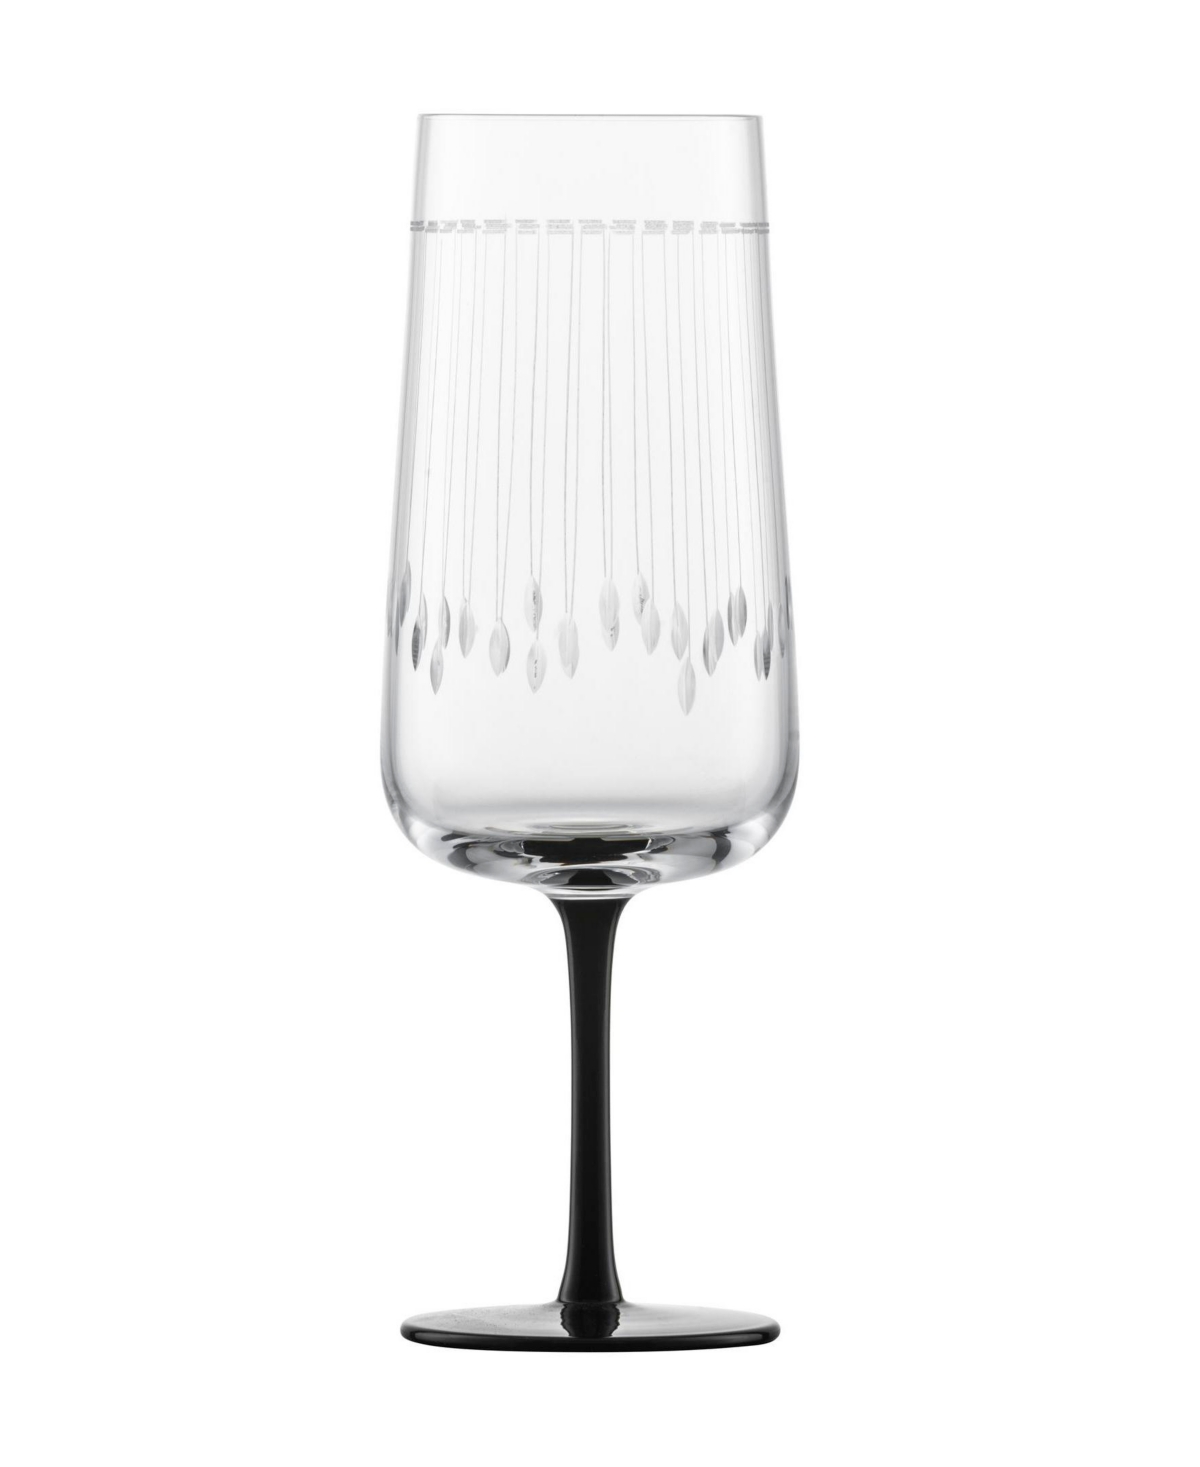 Zwiesel Glas Handmade Glamorous Champagne Flute 10.7oz In Transparent